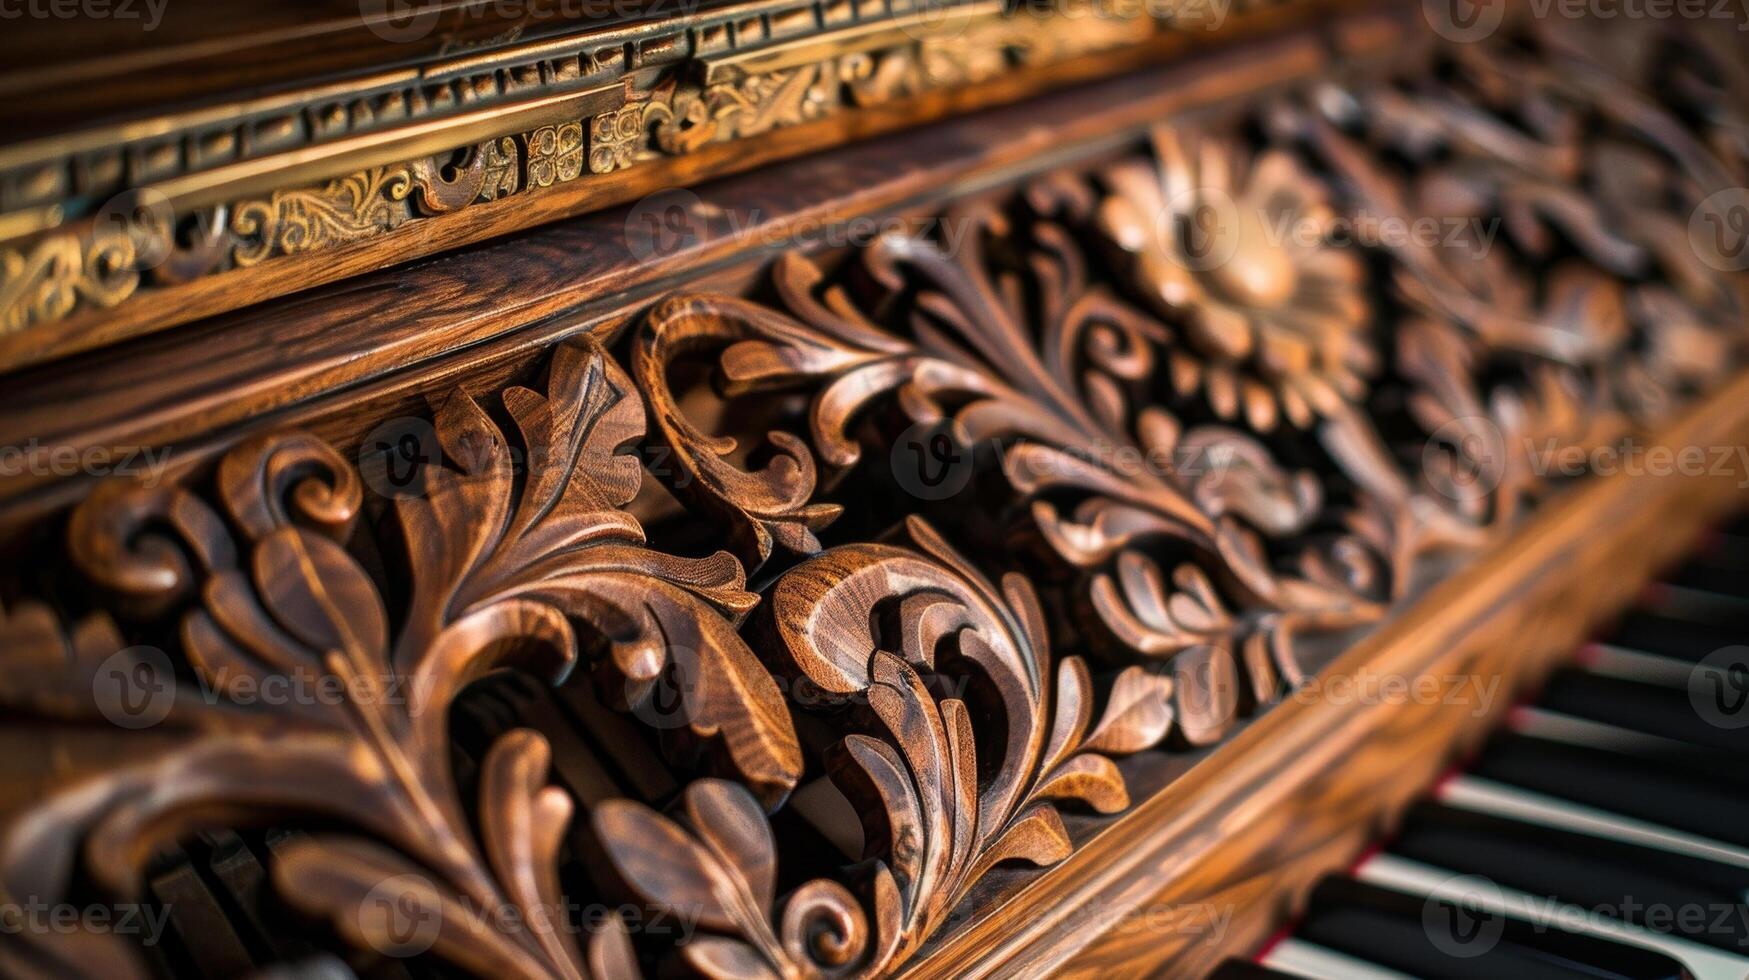 A closeup of a restored piano with its keys polished and the intricate woodwork cleaned and repaired photo